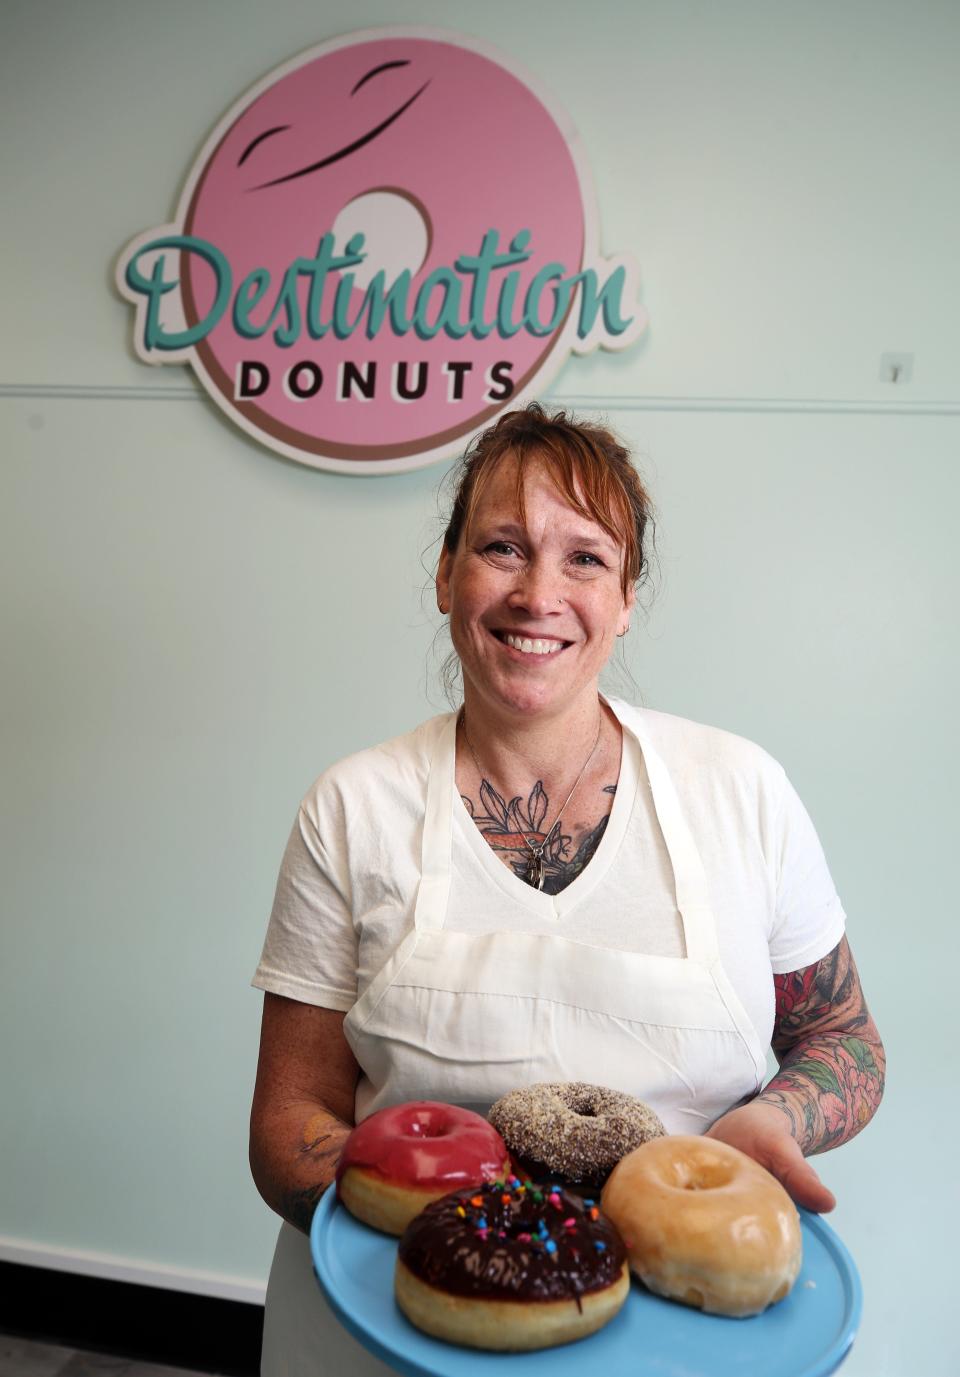 Destination Donuts owner Heather Morris displays a plate of doughnuts at the new Clintonville store at 3519 N. High St., which was opened April 7.